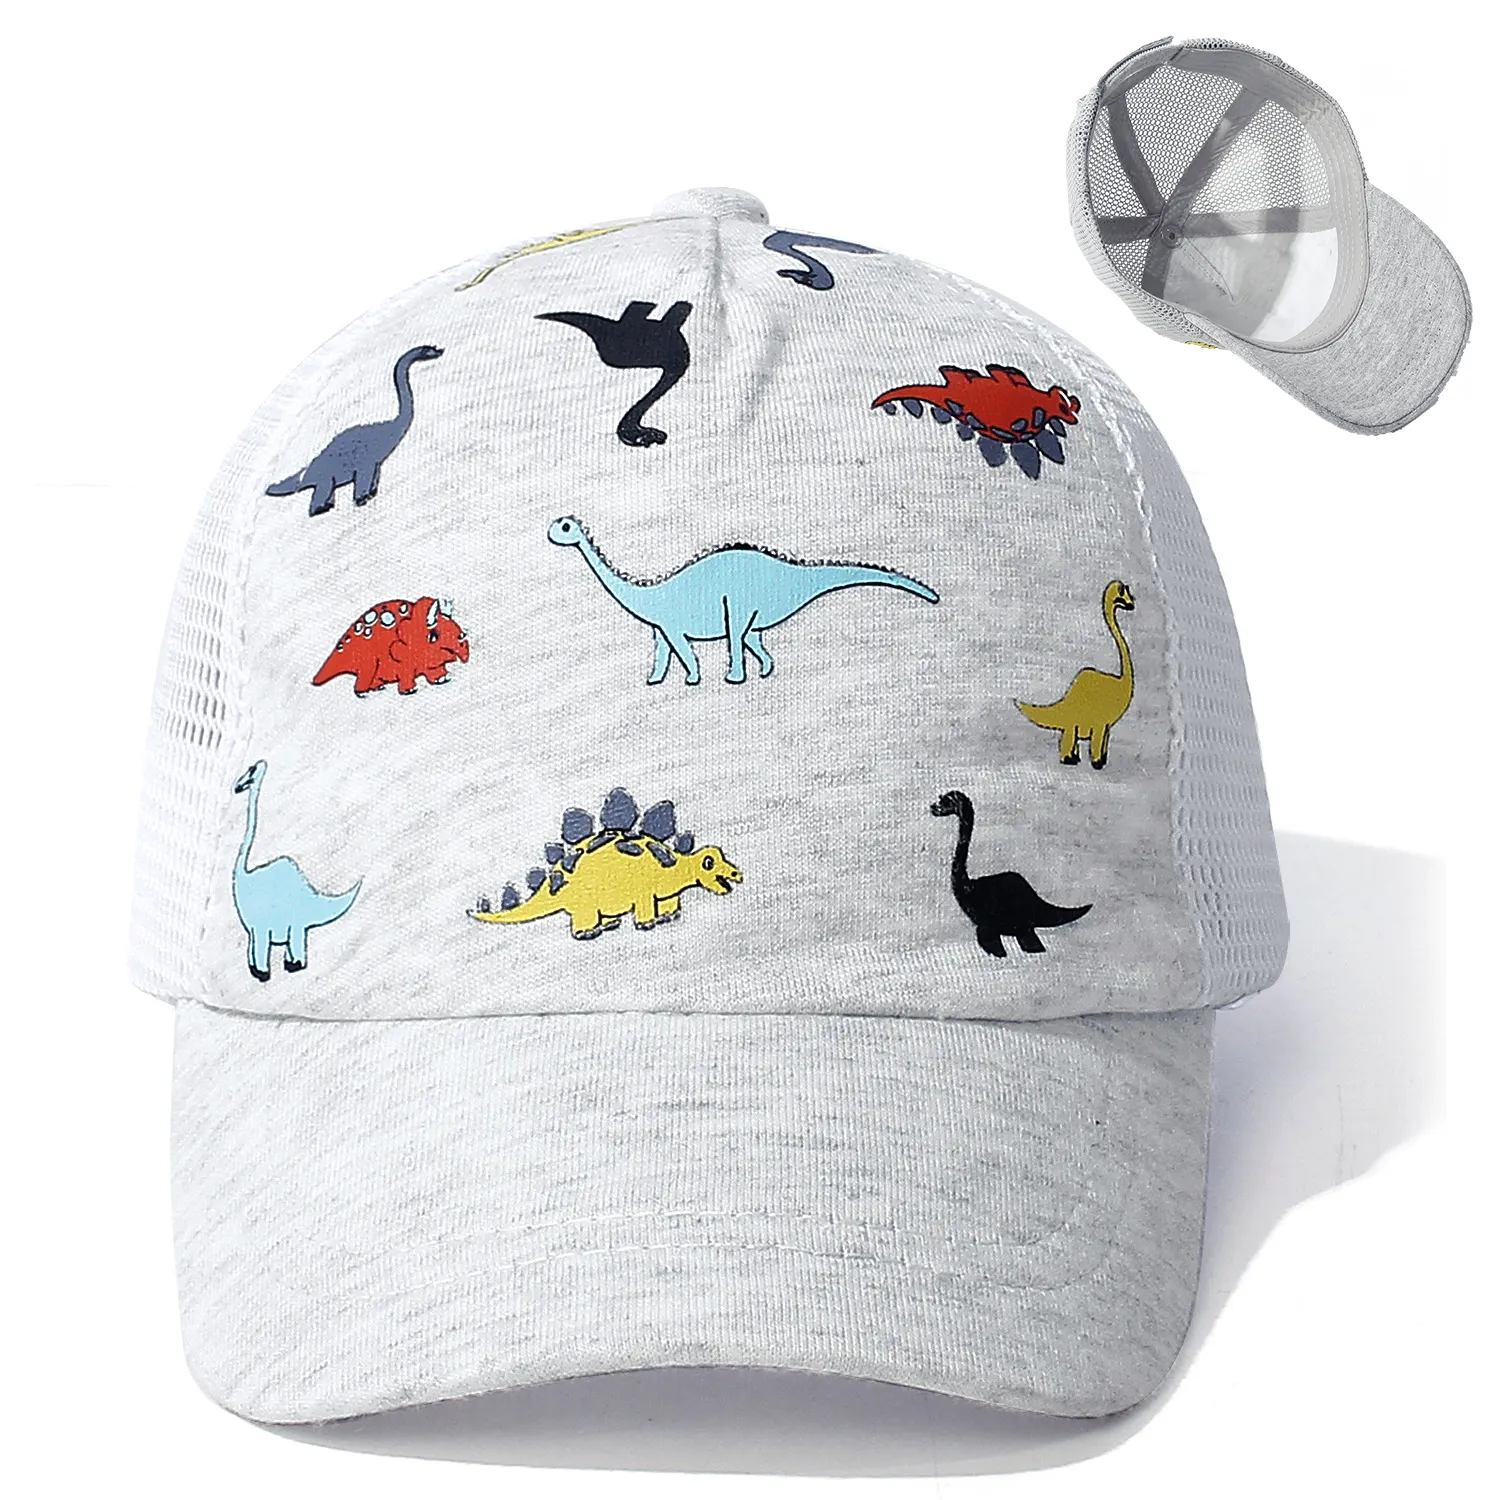 HZM-24088 New Style Printing Cute Little Dinosaur Cotton Kids Mesh Baseball Cap For 1-5 Ages